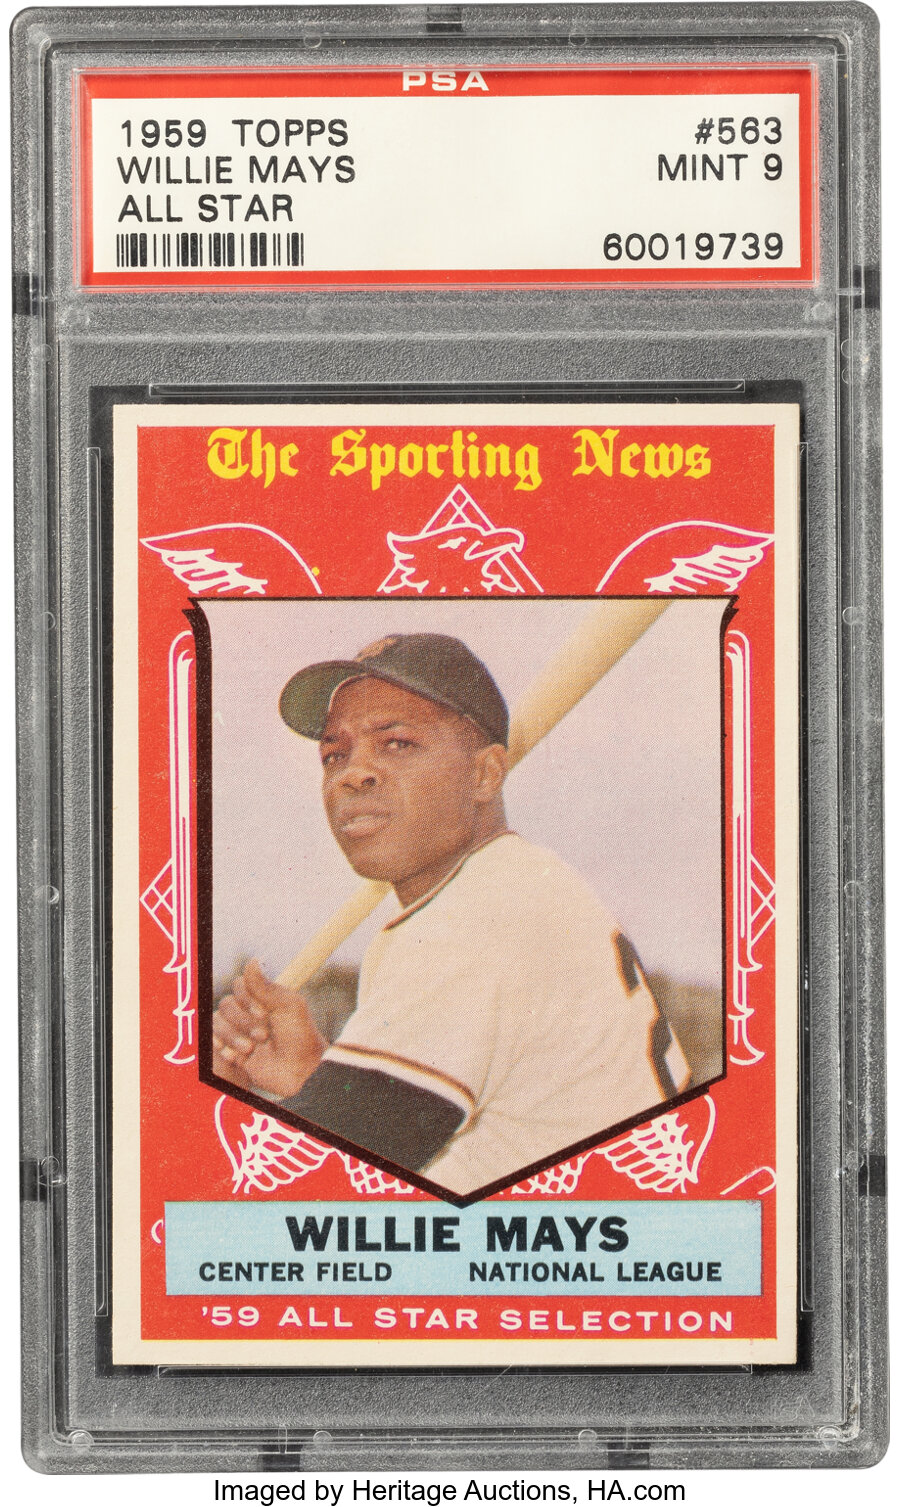 1959 Topps Willie Mays (All Star) #563 PSA Mint 9 - Only One Higher